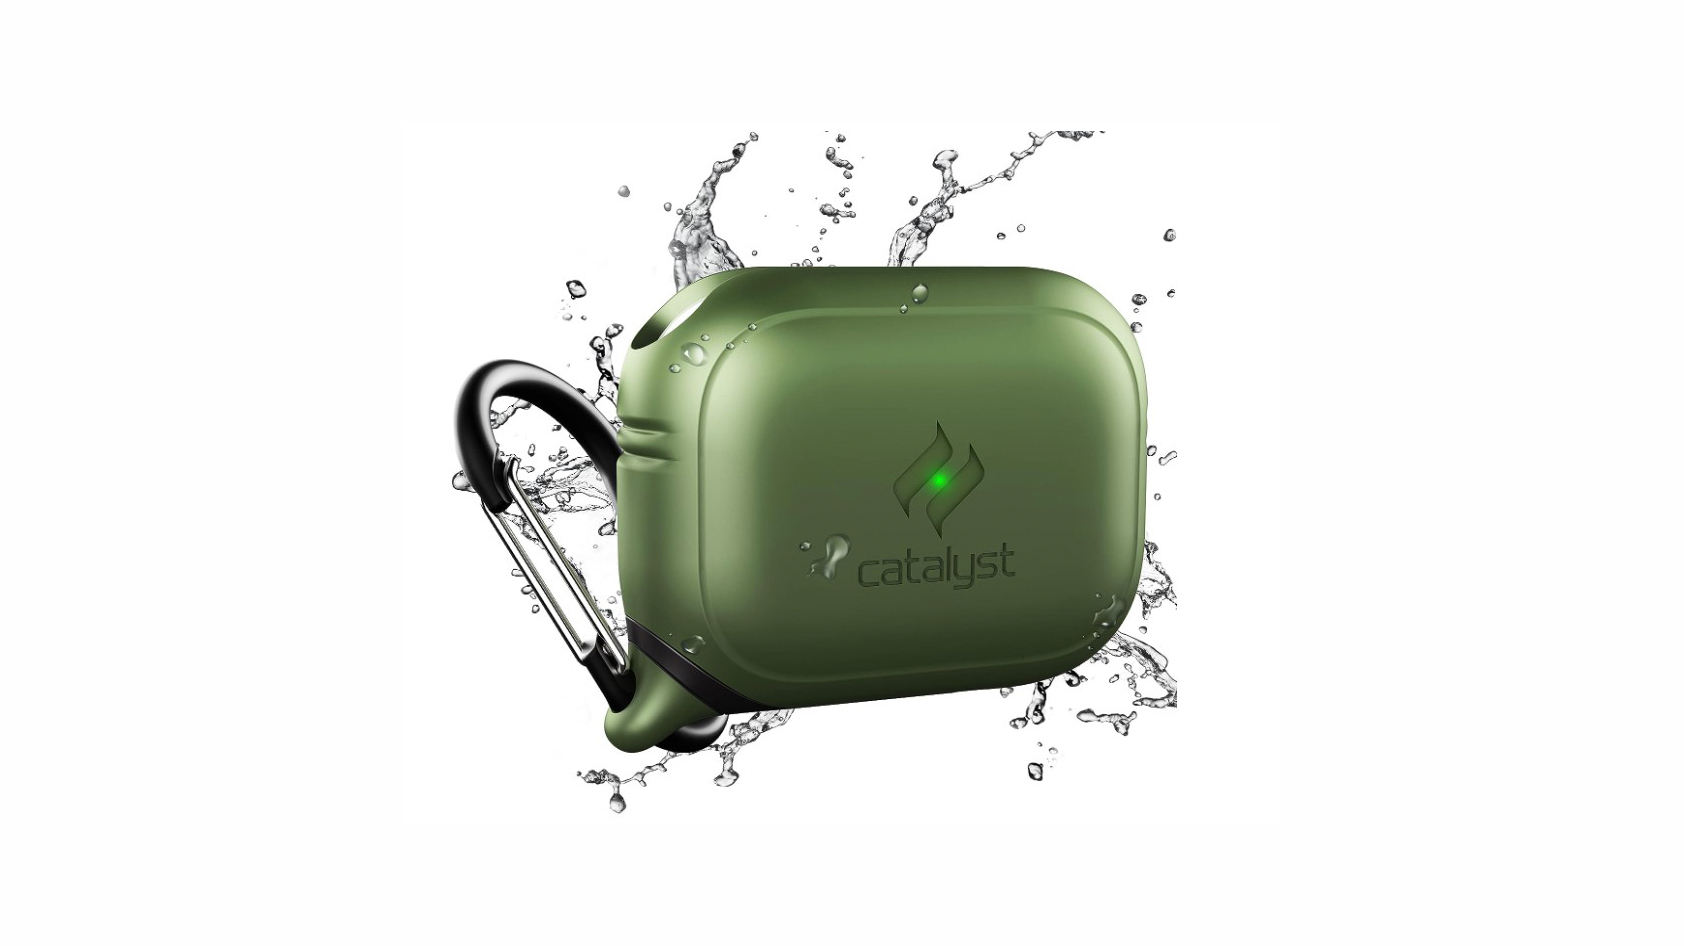 The green Catalyst AirPods Pro case shown on a white background with water splashing off of it.